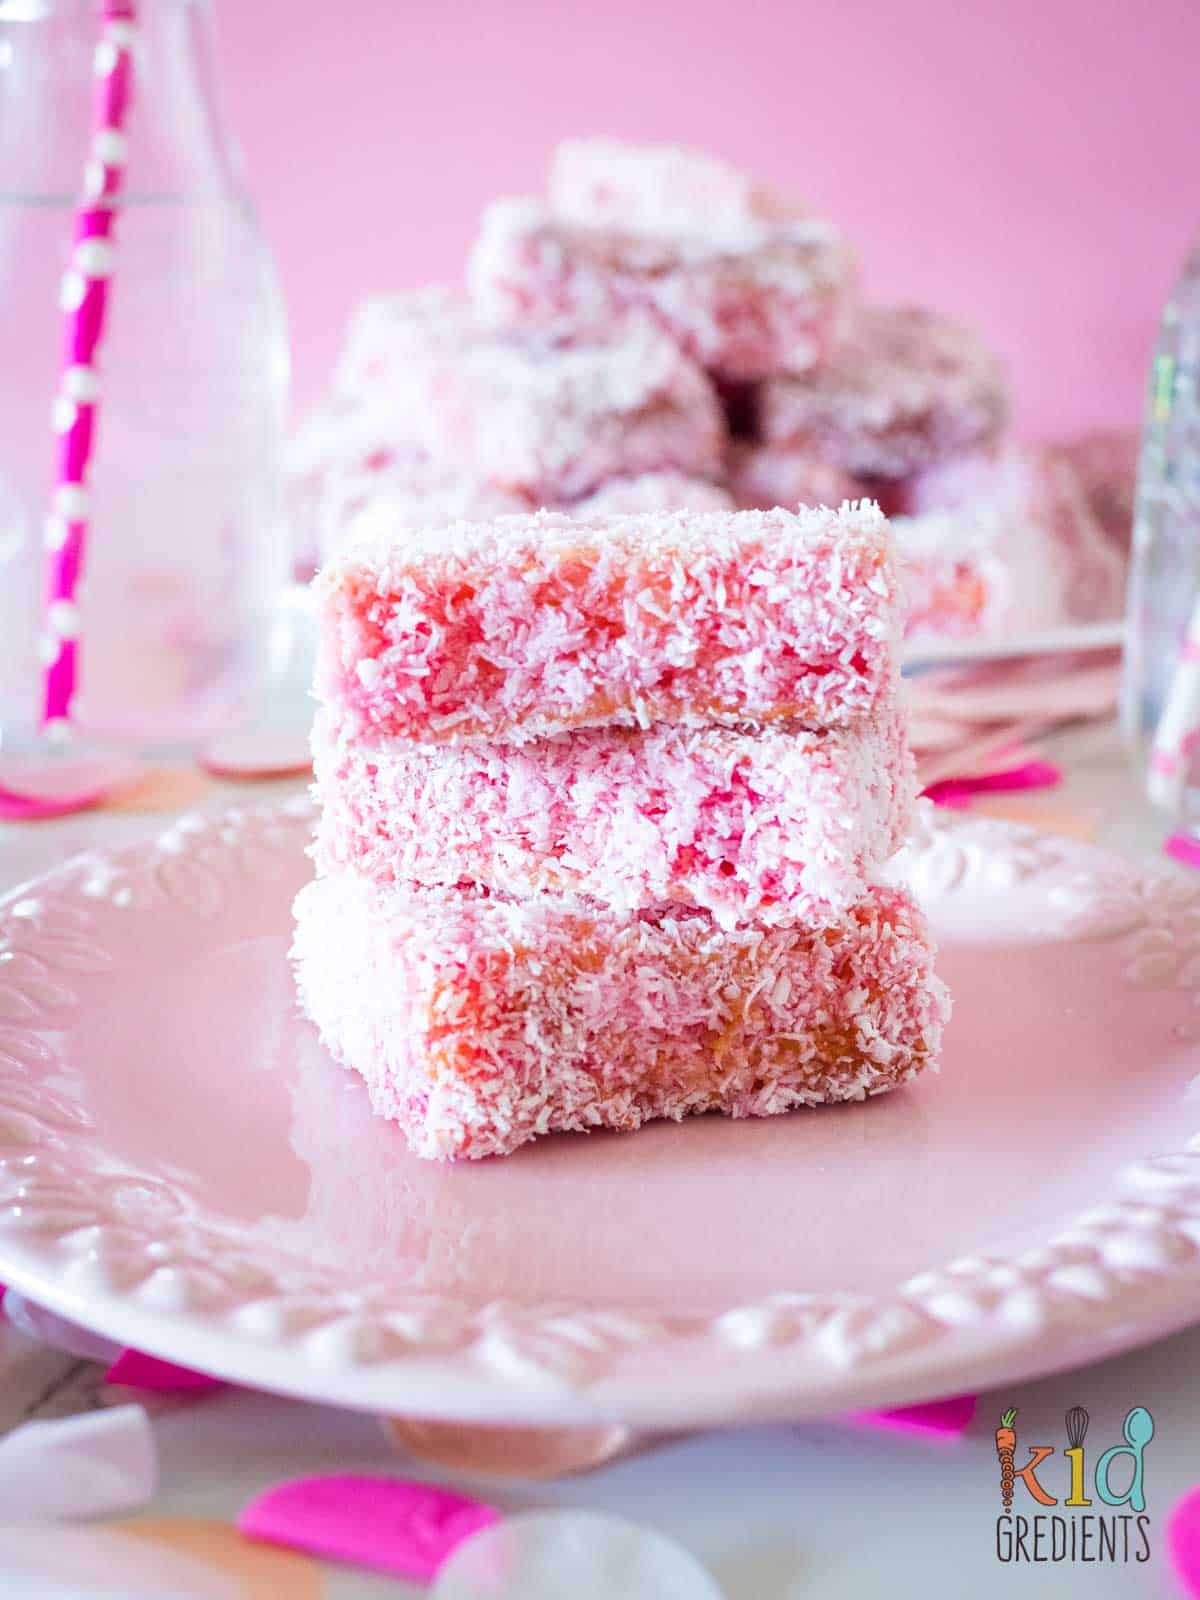 Pink lamingtons on a pink plate, with a pile of pink lamingtons behind